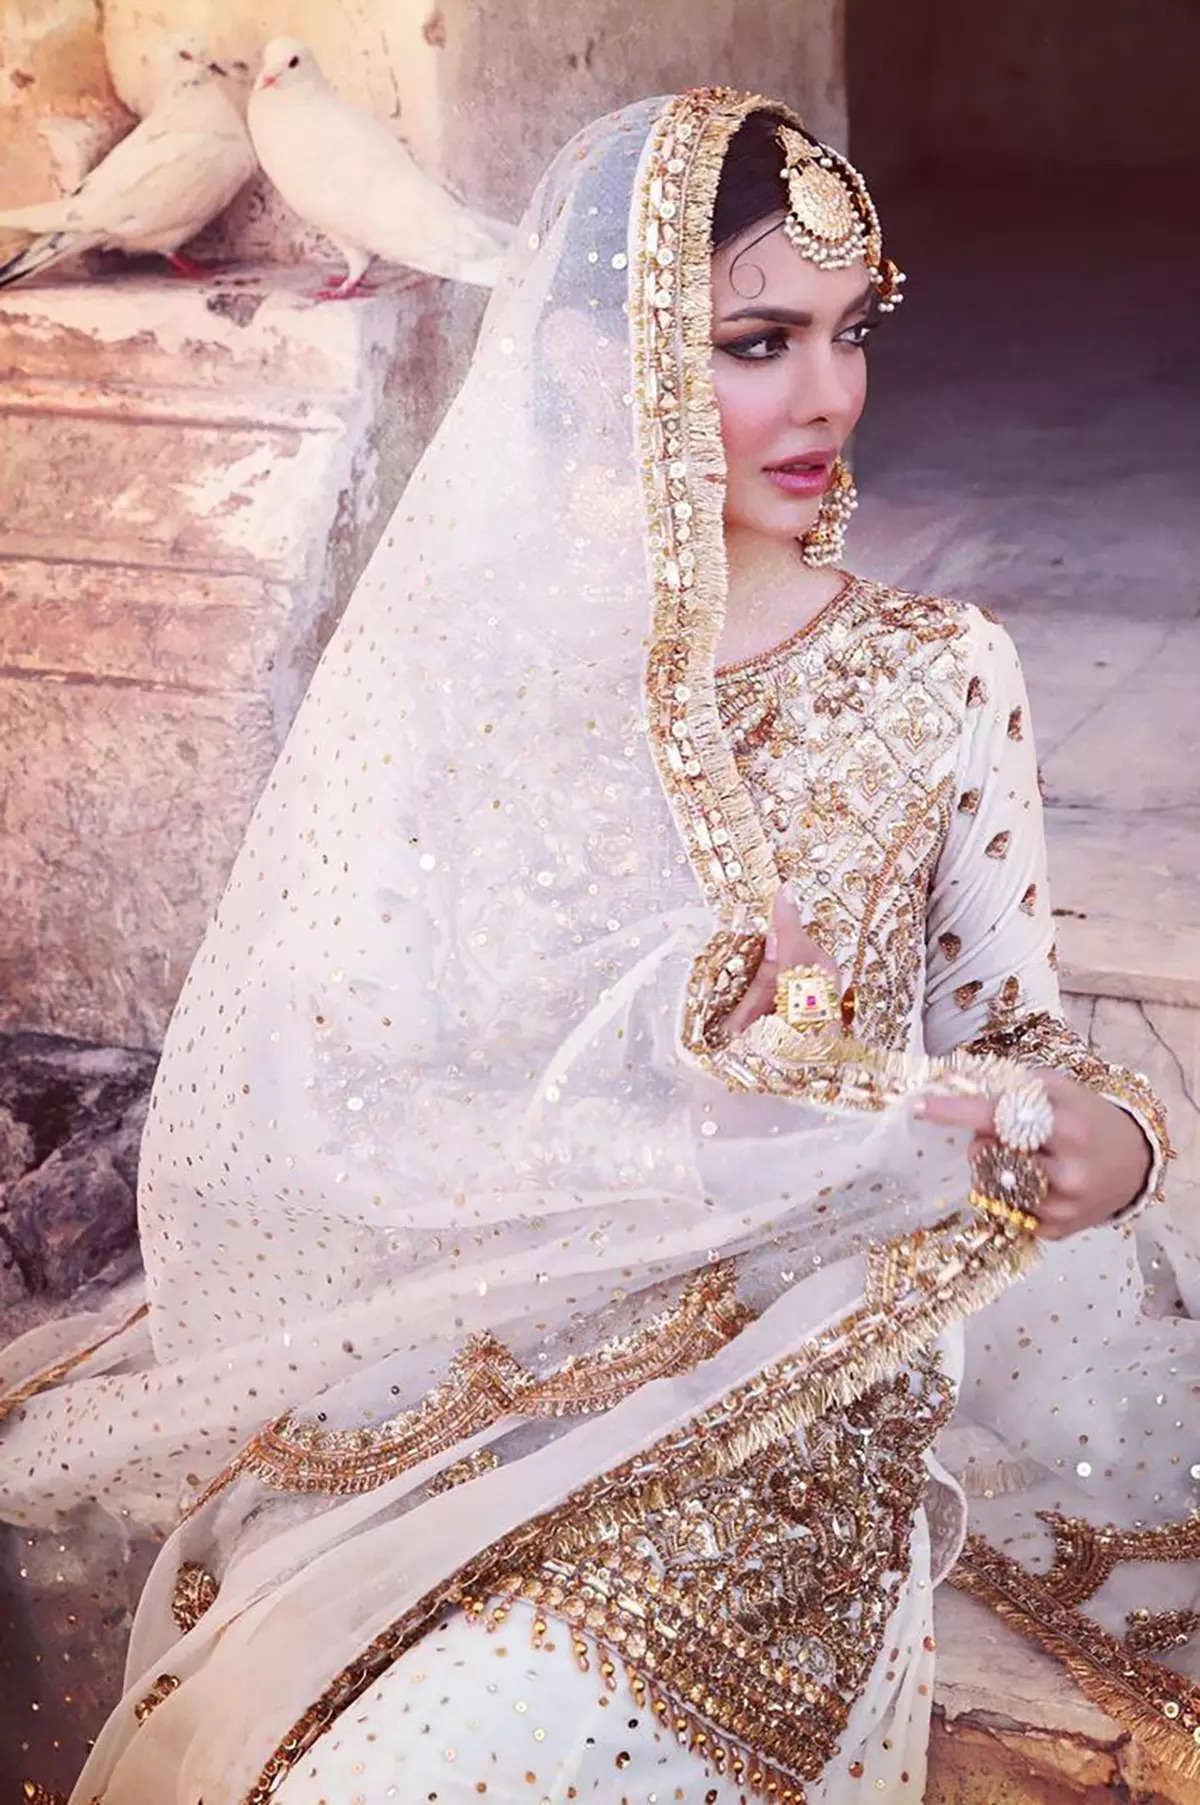 Pakistani model Sara Loren's beauty will make you fall for her even more